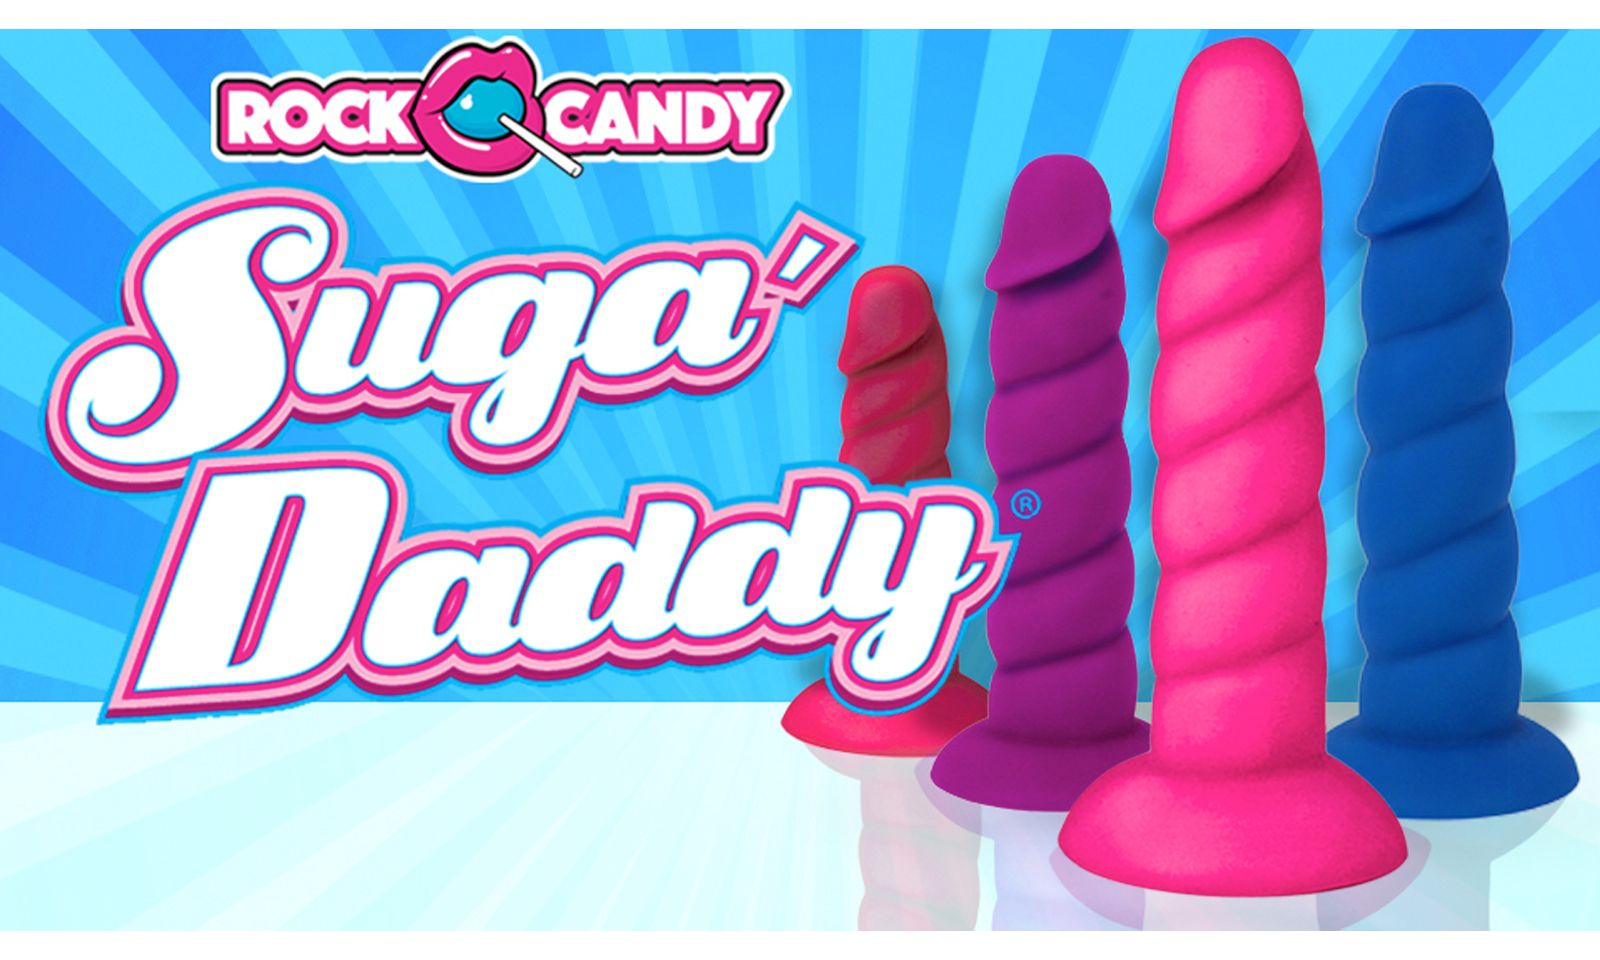 Rock Candy Toys Expands with Silicone Suga’ Daddy Line